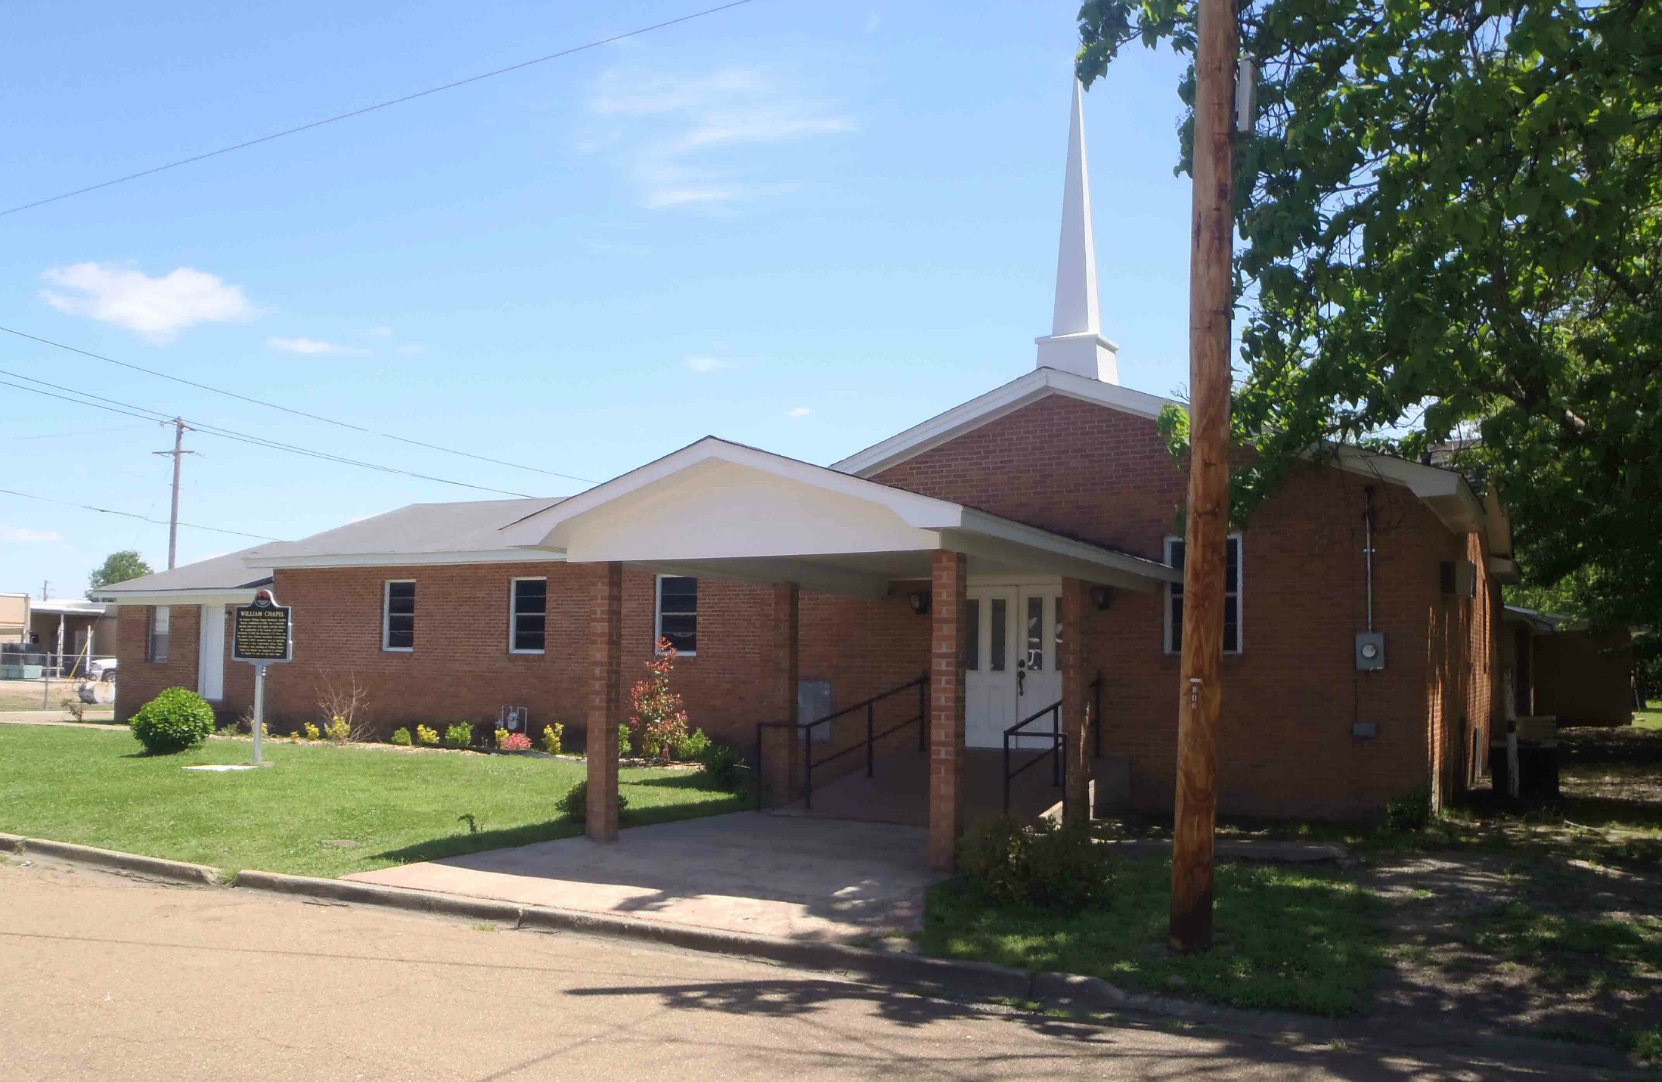 William Chapel Missionary Baptist Church, Ruleville, Mississippi. The Mississippi Freedom Trail marker is visible on the lawn in front of the church.